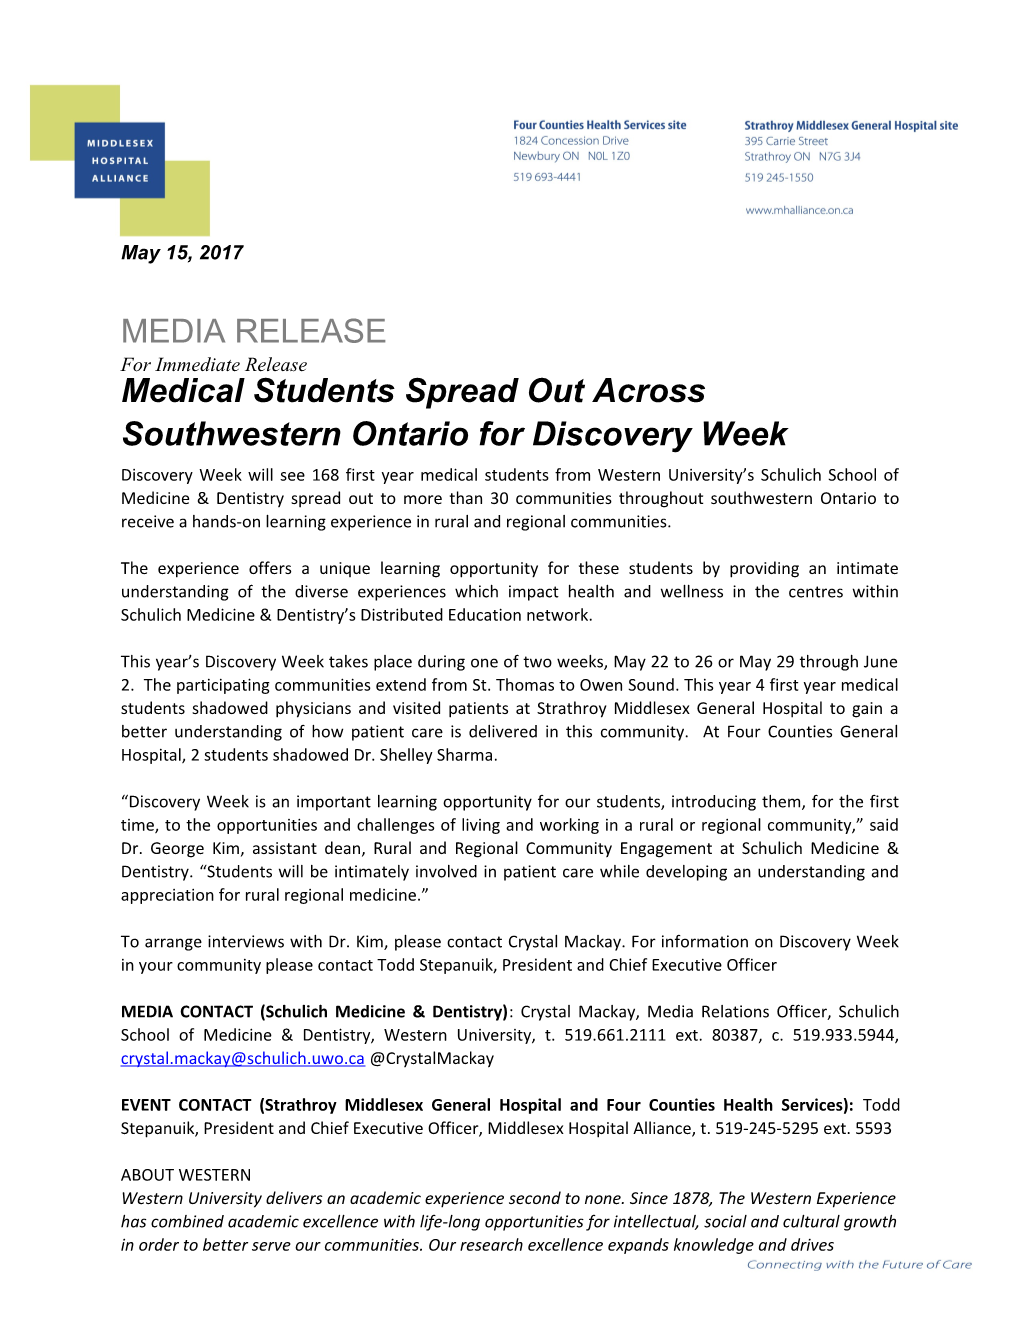 Medical Students Spread out Across